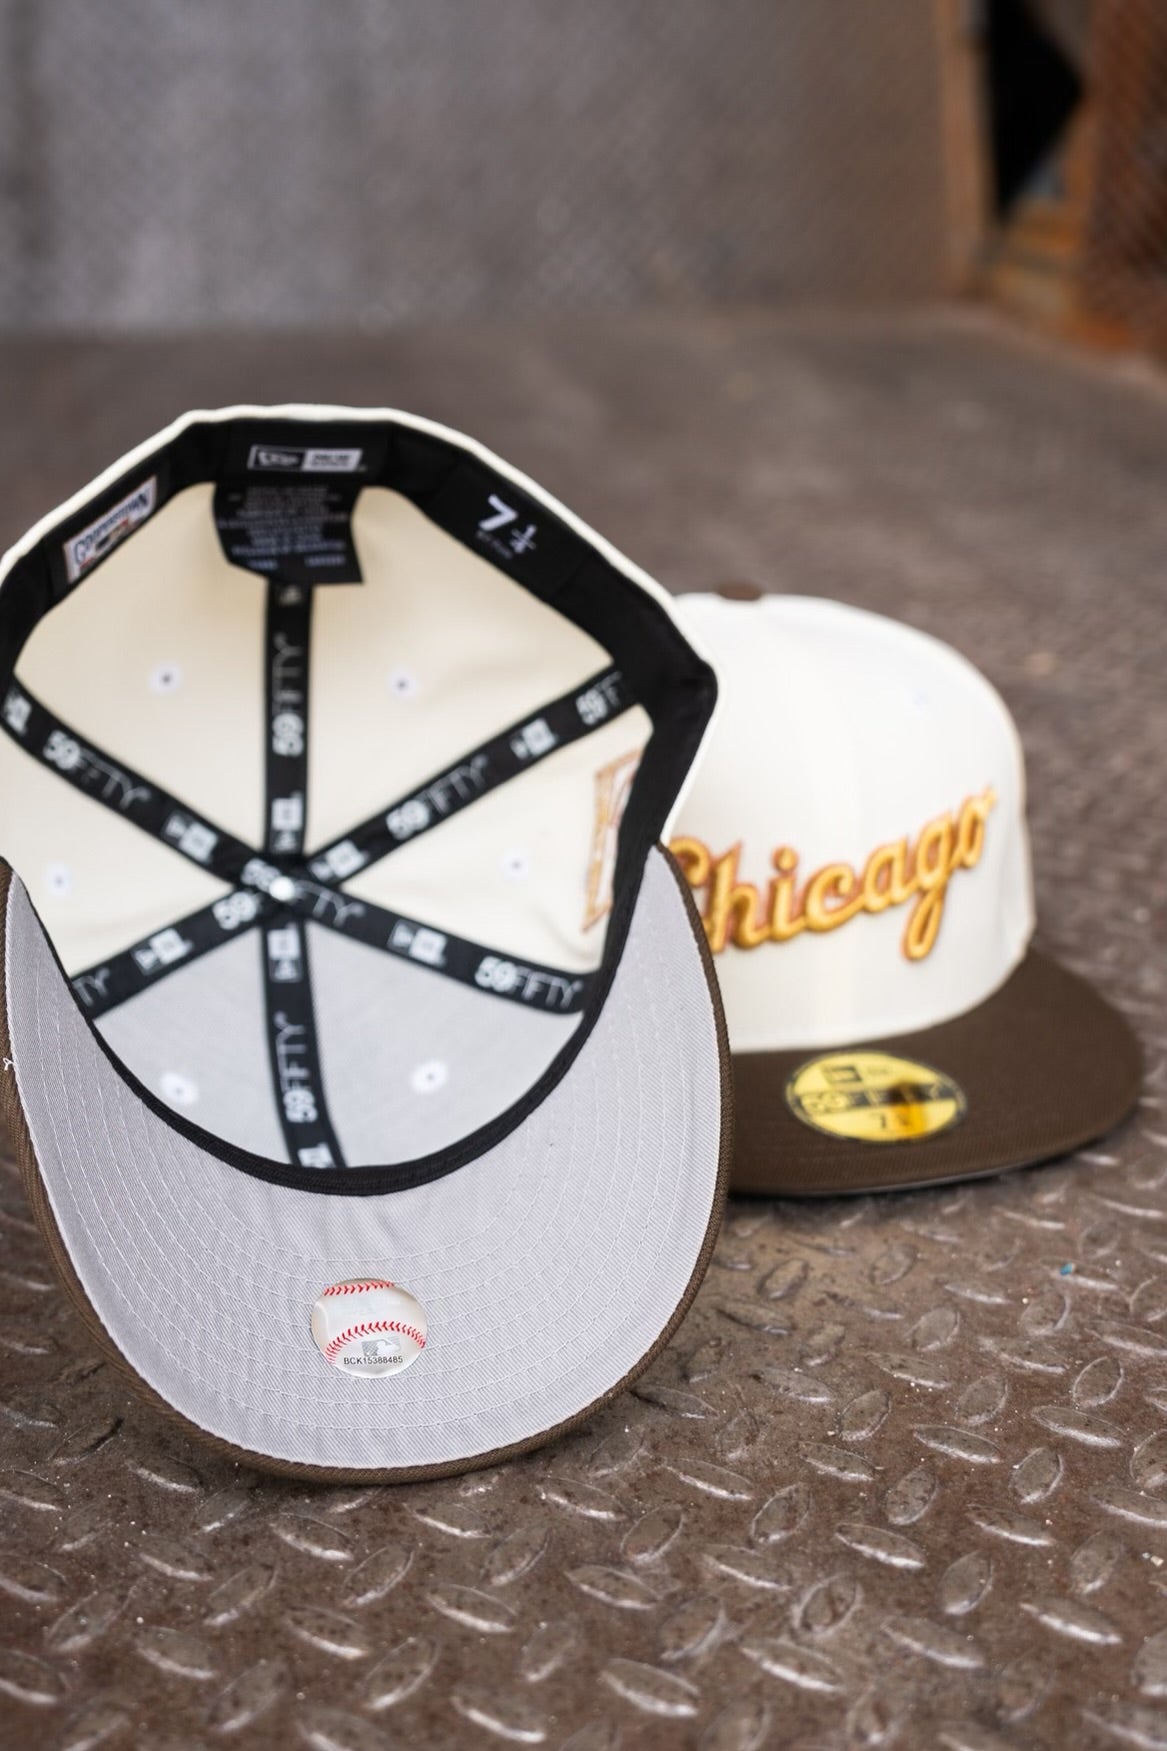 New Era Chicago White Sox 95th Anniversary Grey UV (Off White/Walnut) 59Fifty Fitted